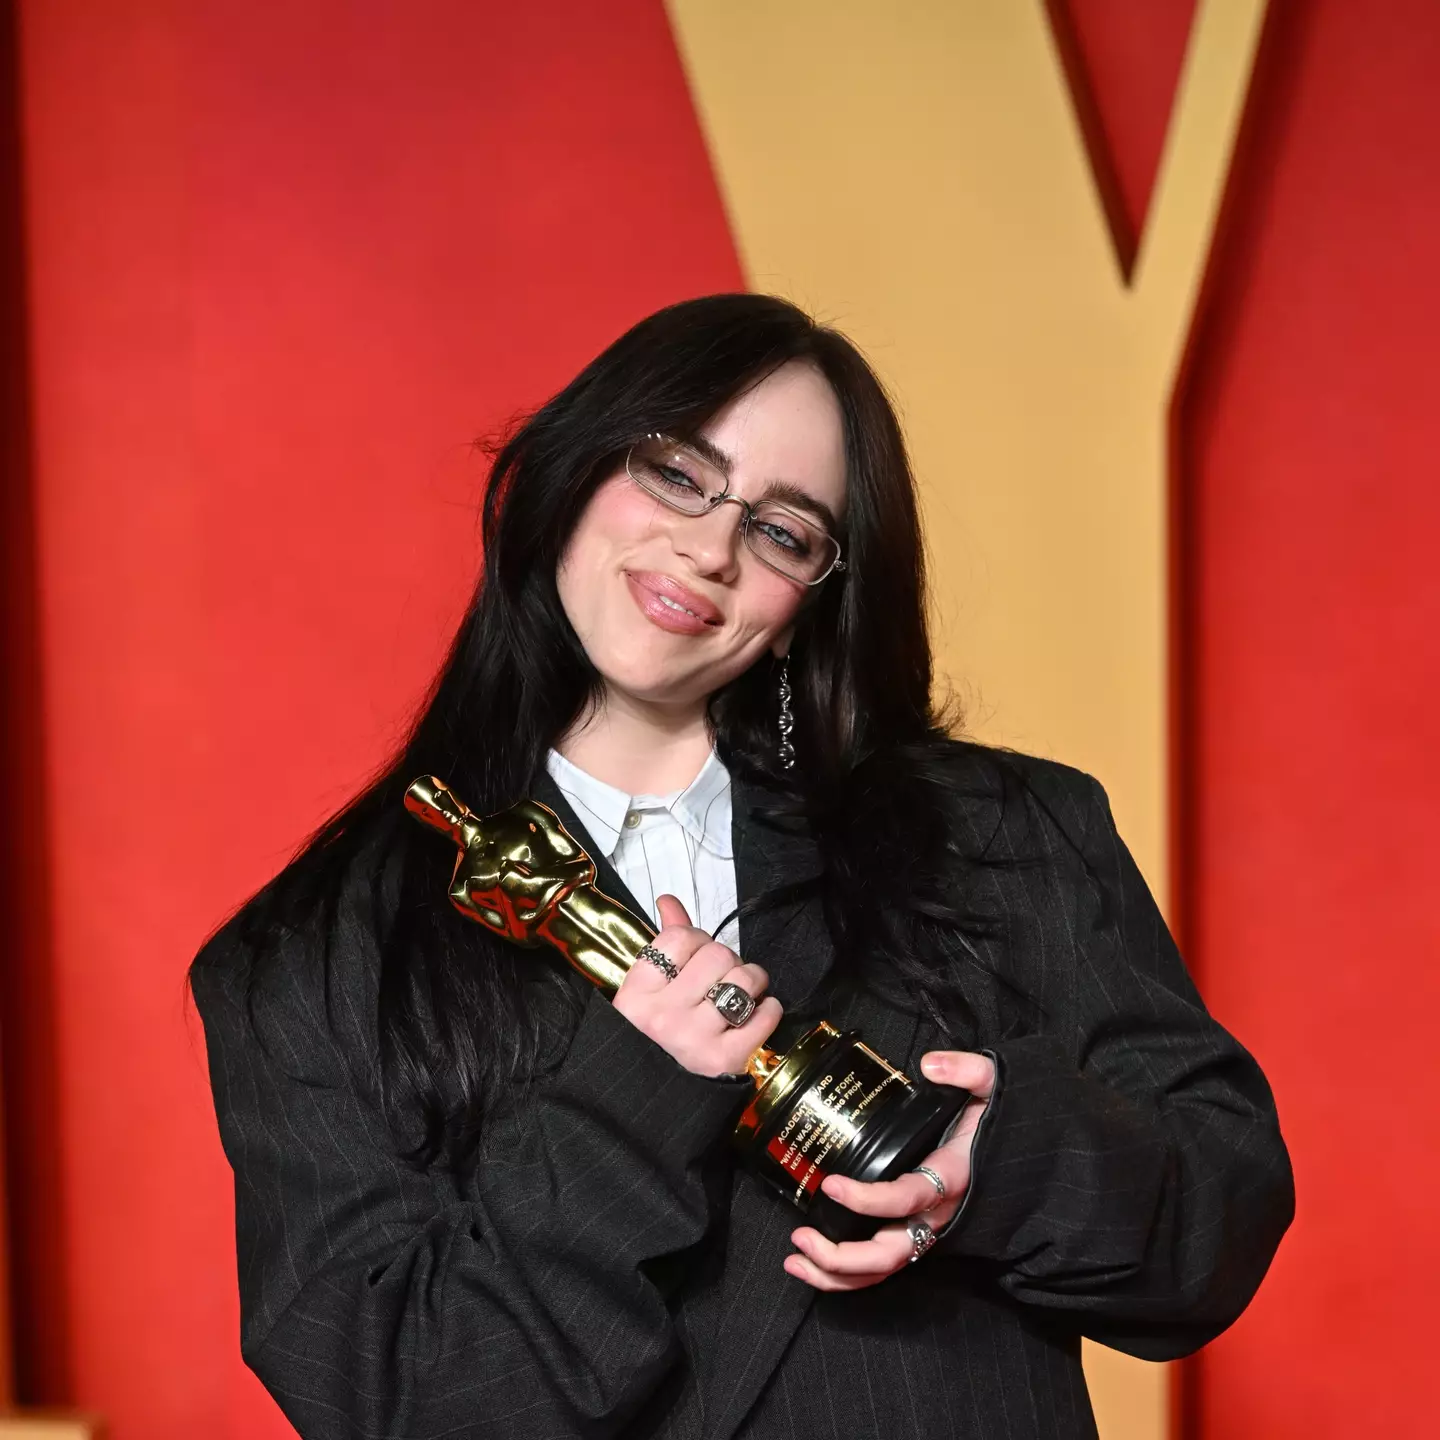 Billie Eilish is among the musicians who've signed the letter.